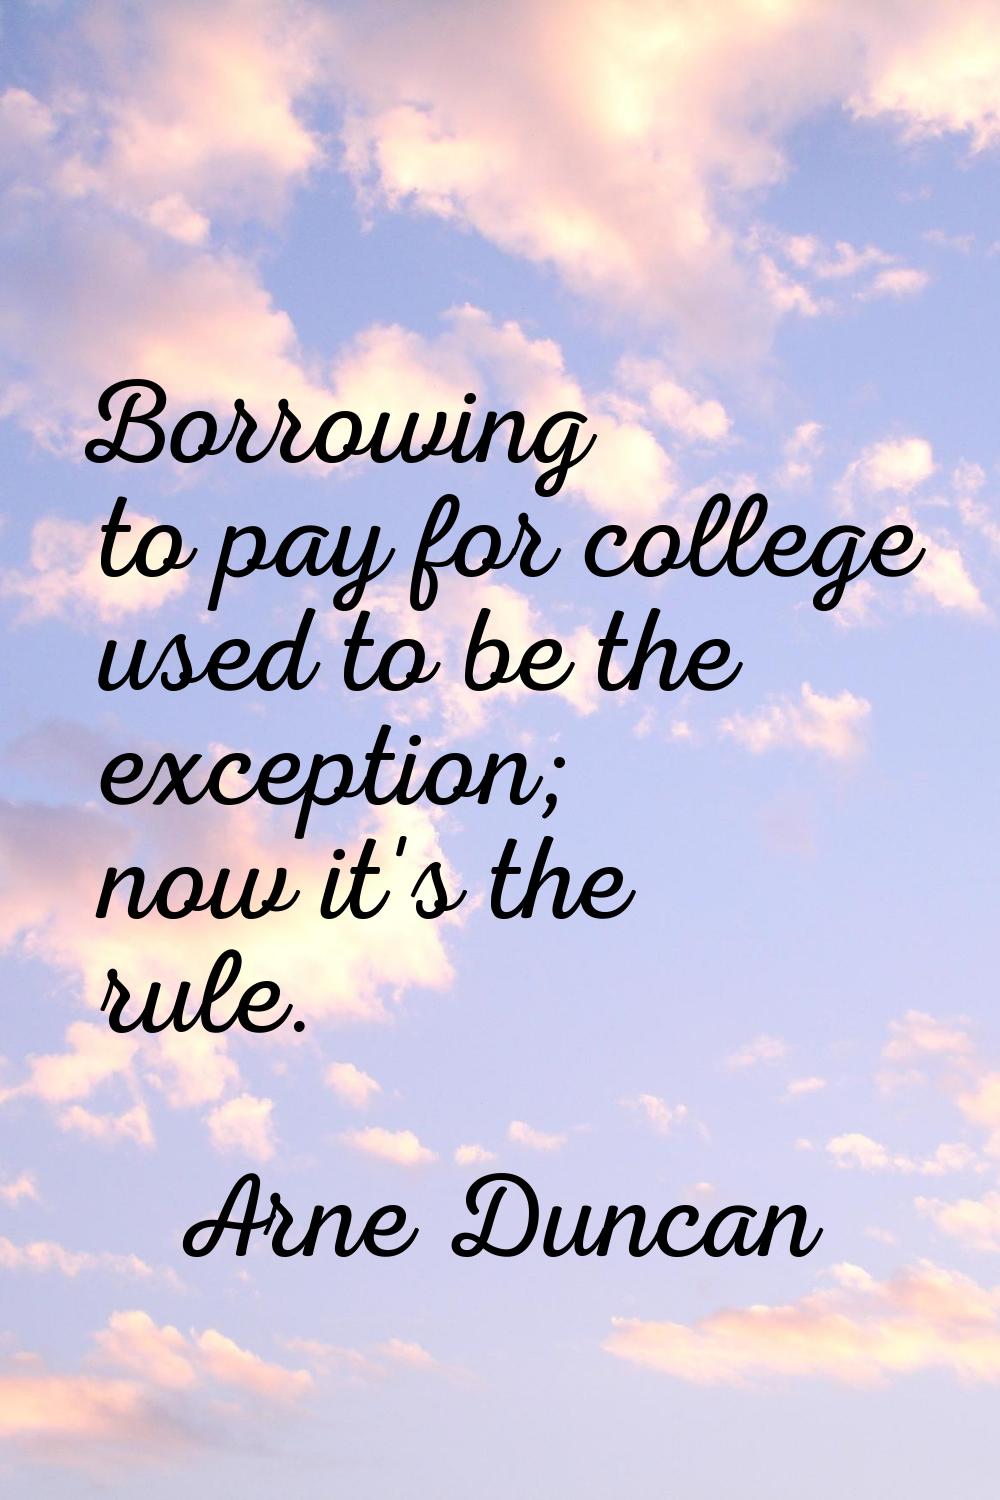 Borrowing to pay for college used to be the exception; now it's the rule.